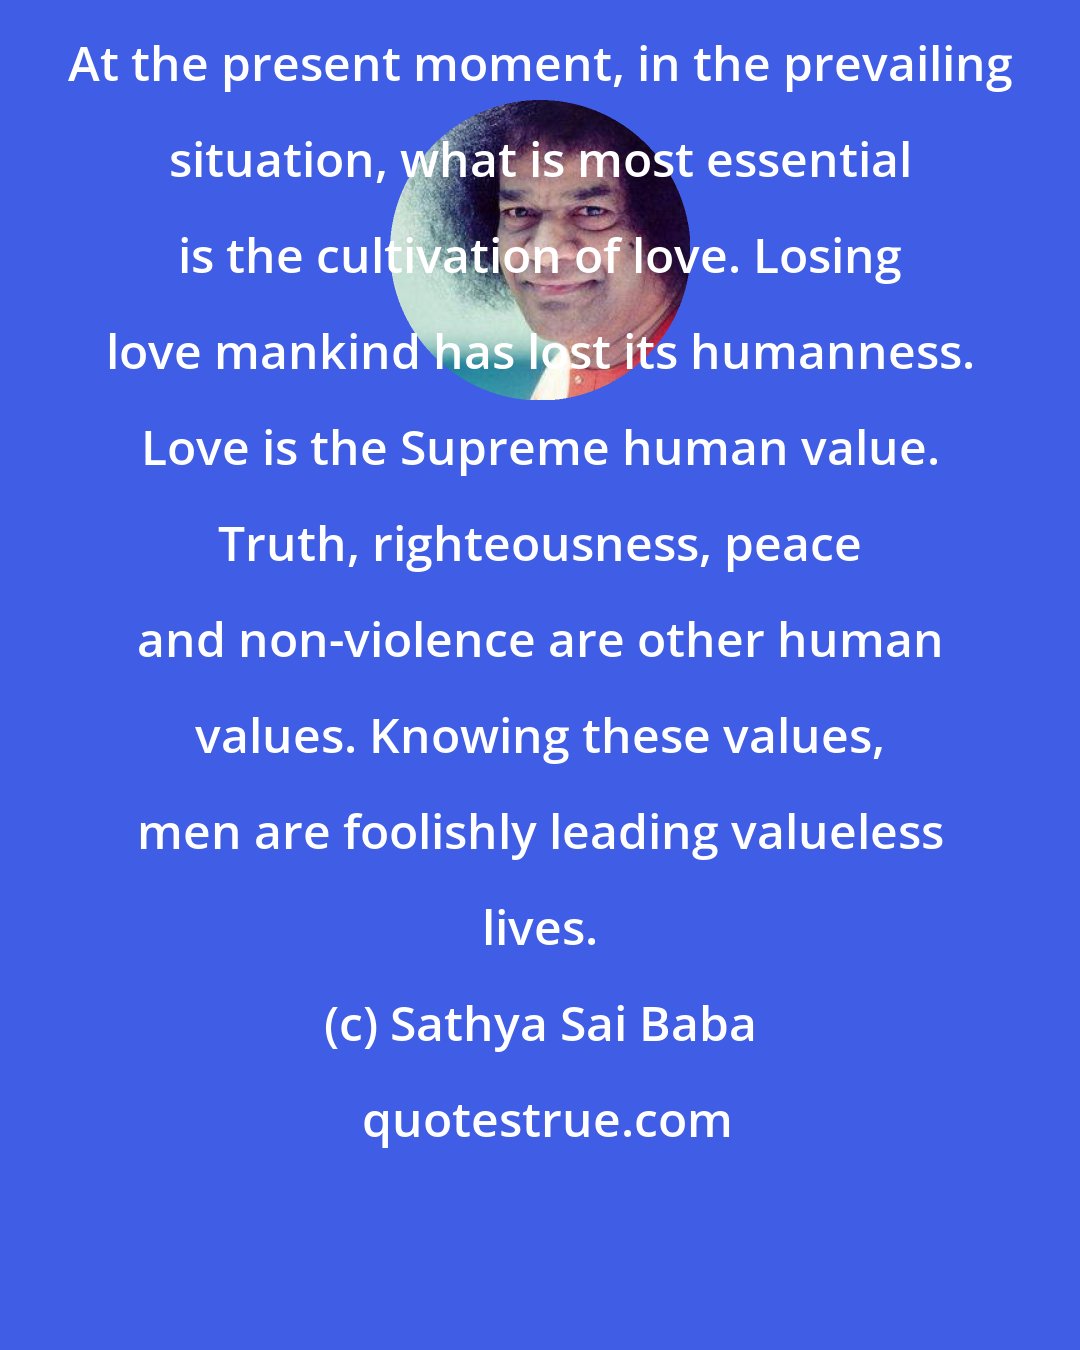 Sathya Sai Baba: At the present moment, in the prevailing situation, what is most essential is the cultivation of love. Losing love mankind has lost its humanness. Love is the Supreme human value. Truth, righteousness, peace and non-violence are other human values. Knowing these values, men are foolishly leading valueless lives.